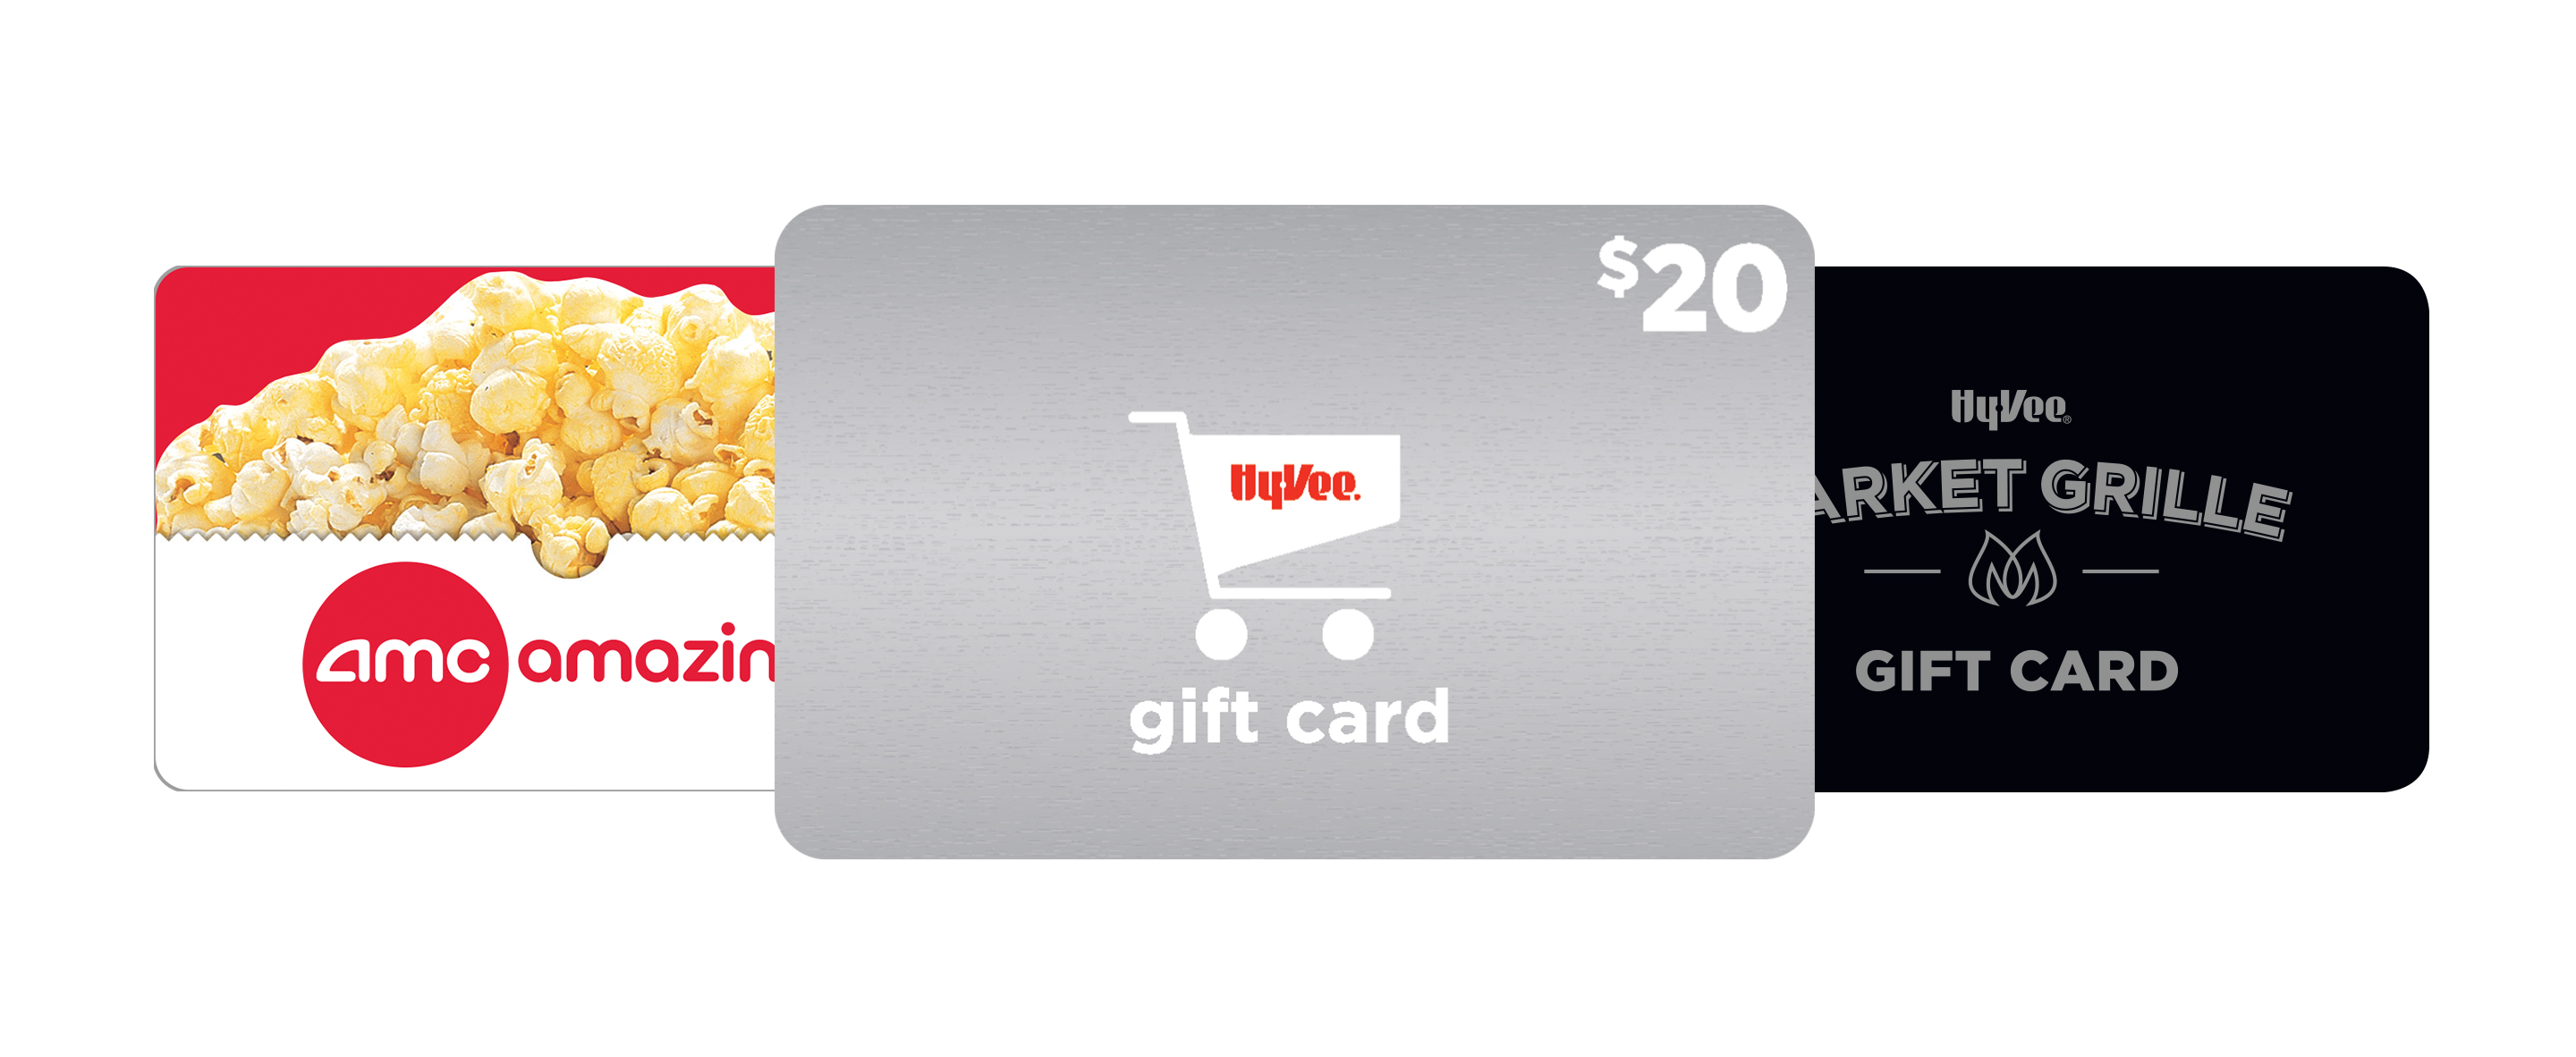 Find The Perfect Gift Basket Or Card Hy Vee Aisles Online